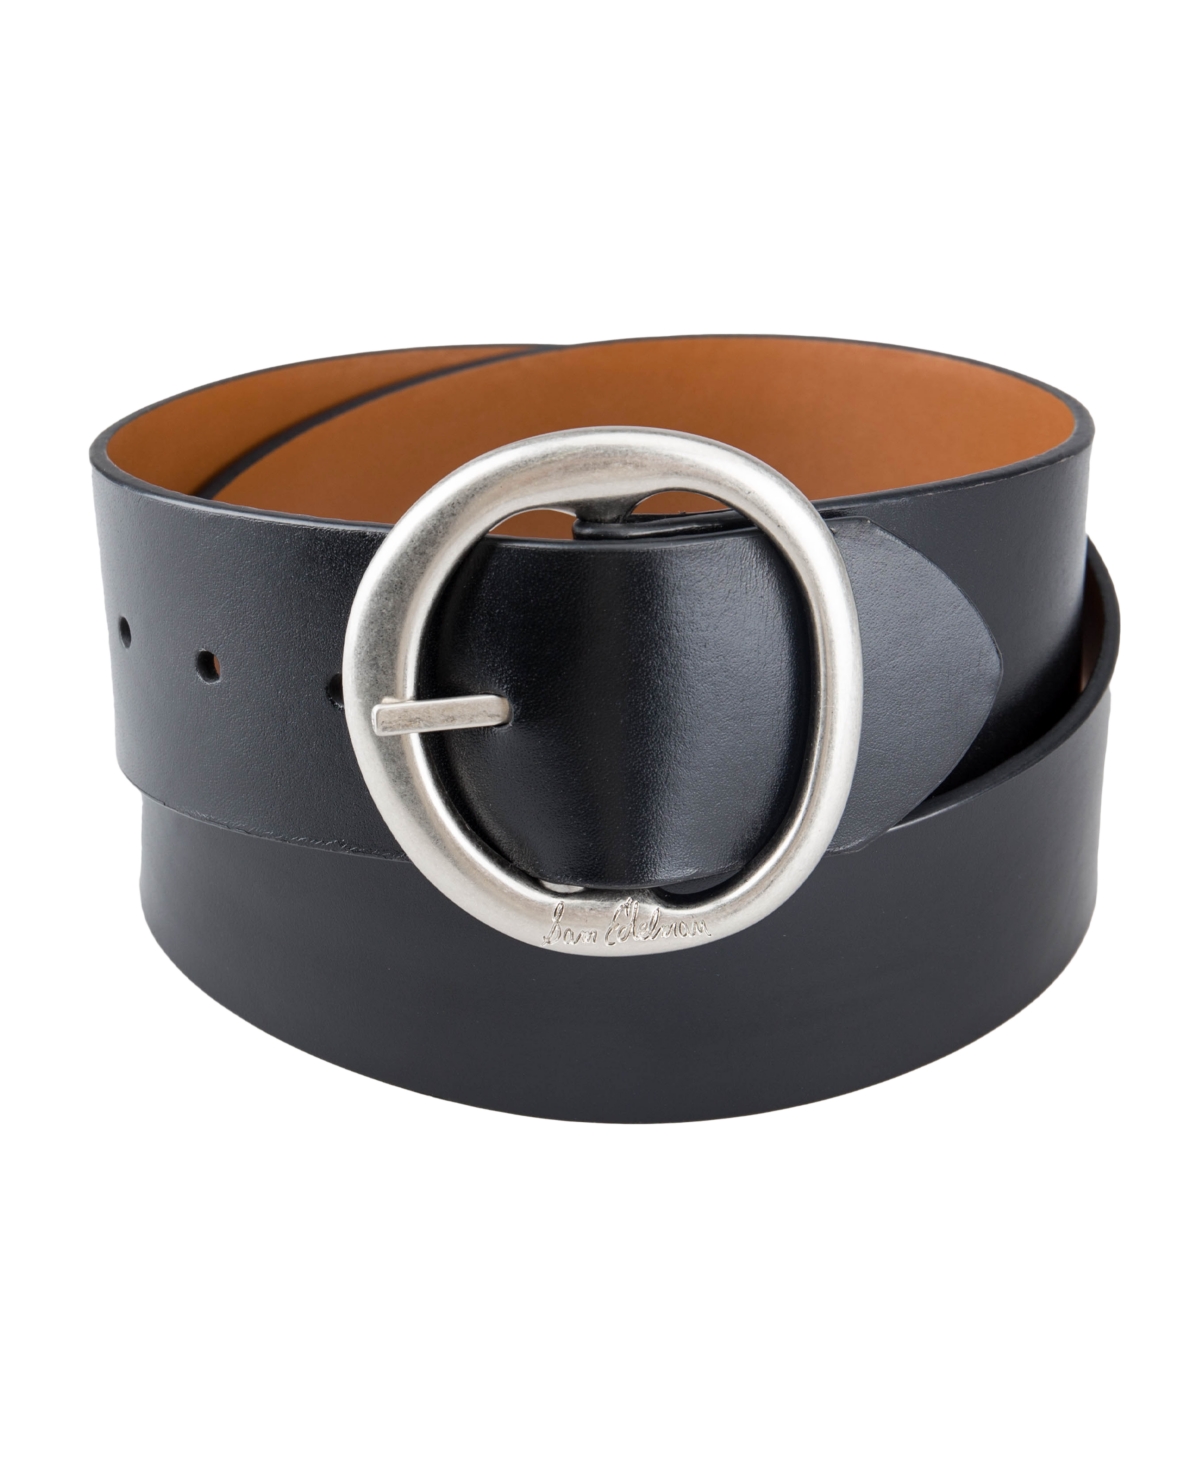 Women's Two-in-One Reversible Center Bar Buckle Belt - Black, Saddle Tan